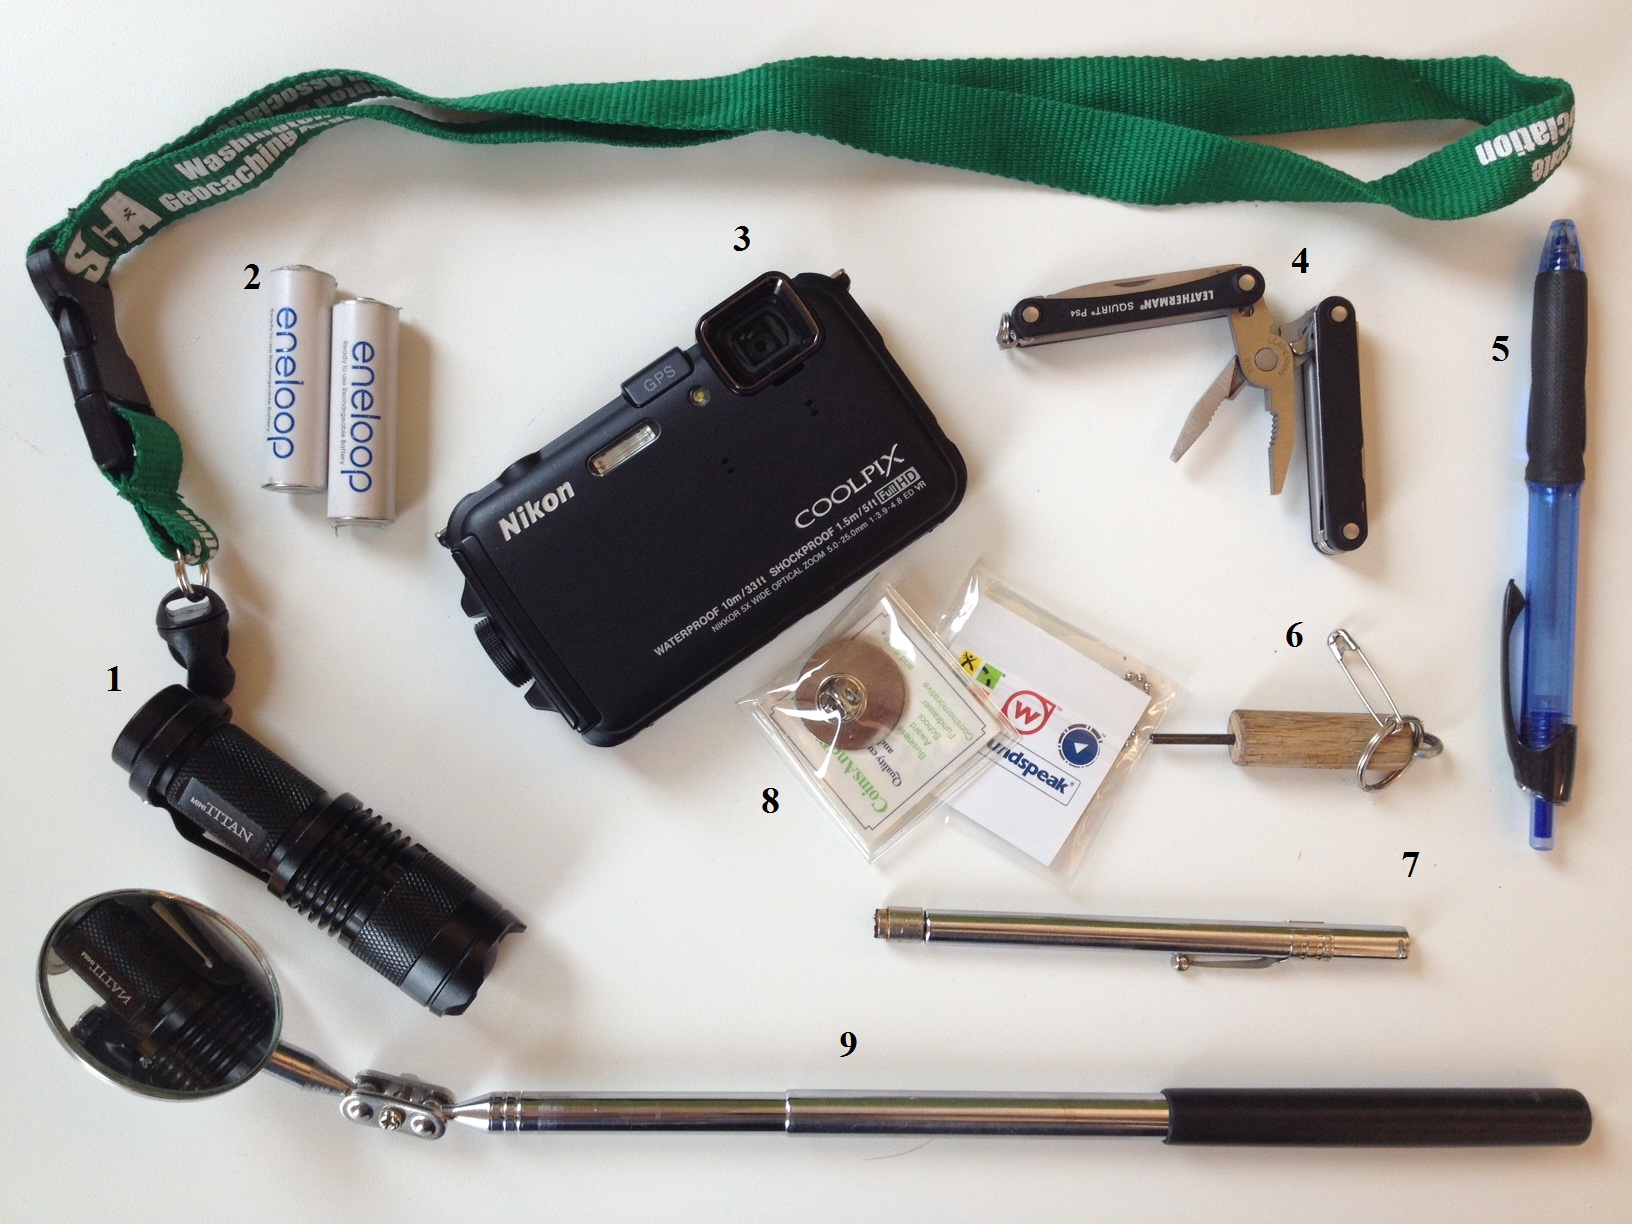 Here are 9 Geocaching Tools – What Else Should You Pack? – Official Blog